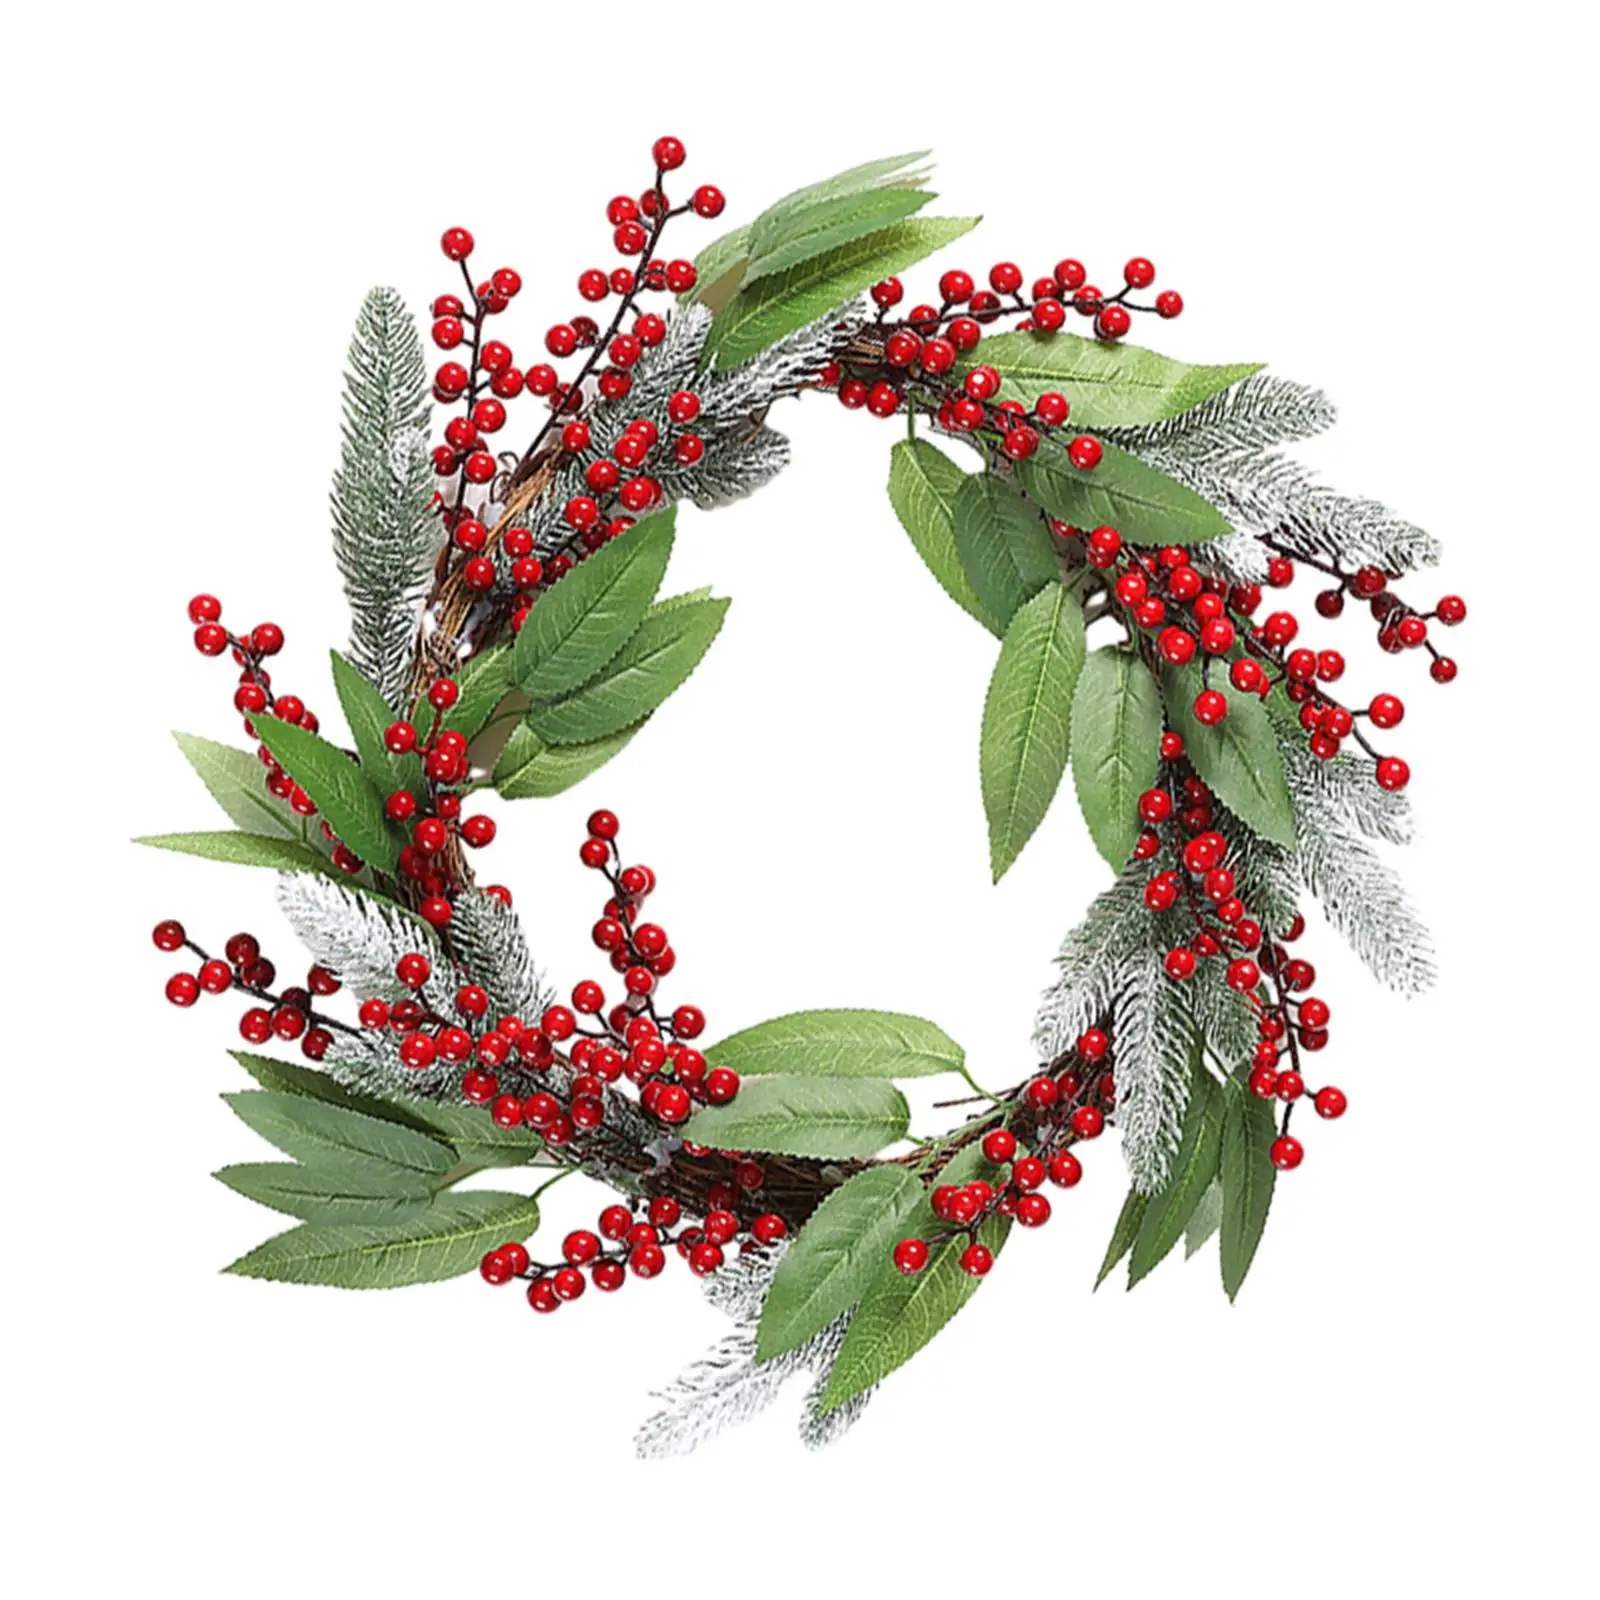 Christmas Wreath 2023 Adorable Lifelike 50cm Diameter Decorative Wreath for Front Door for Hotel Fireplace Window Porch Party